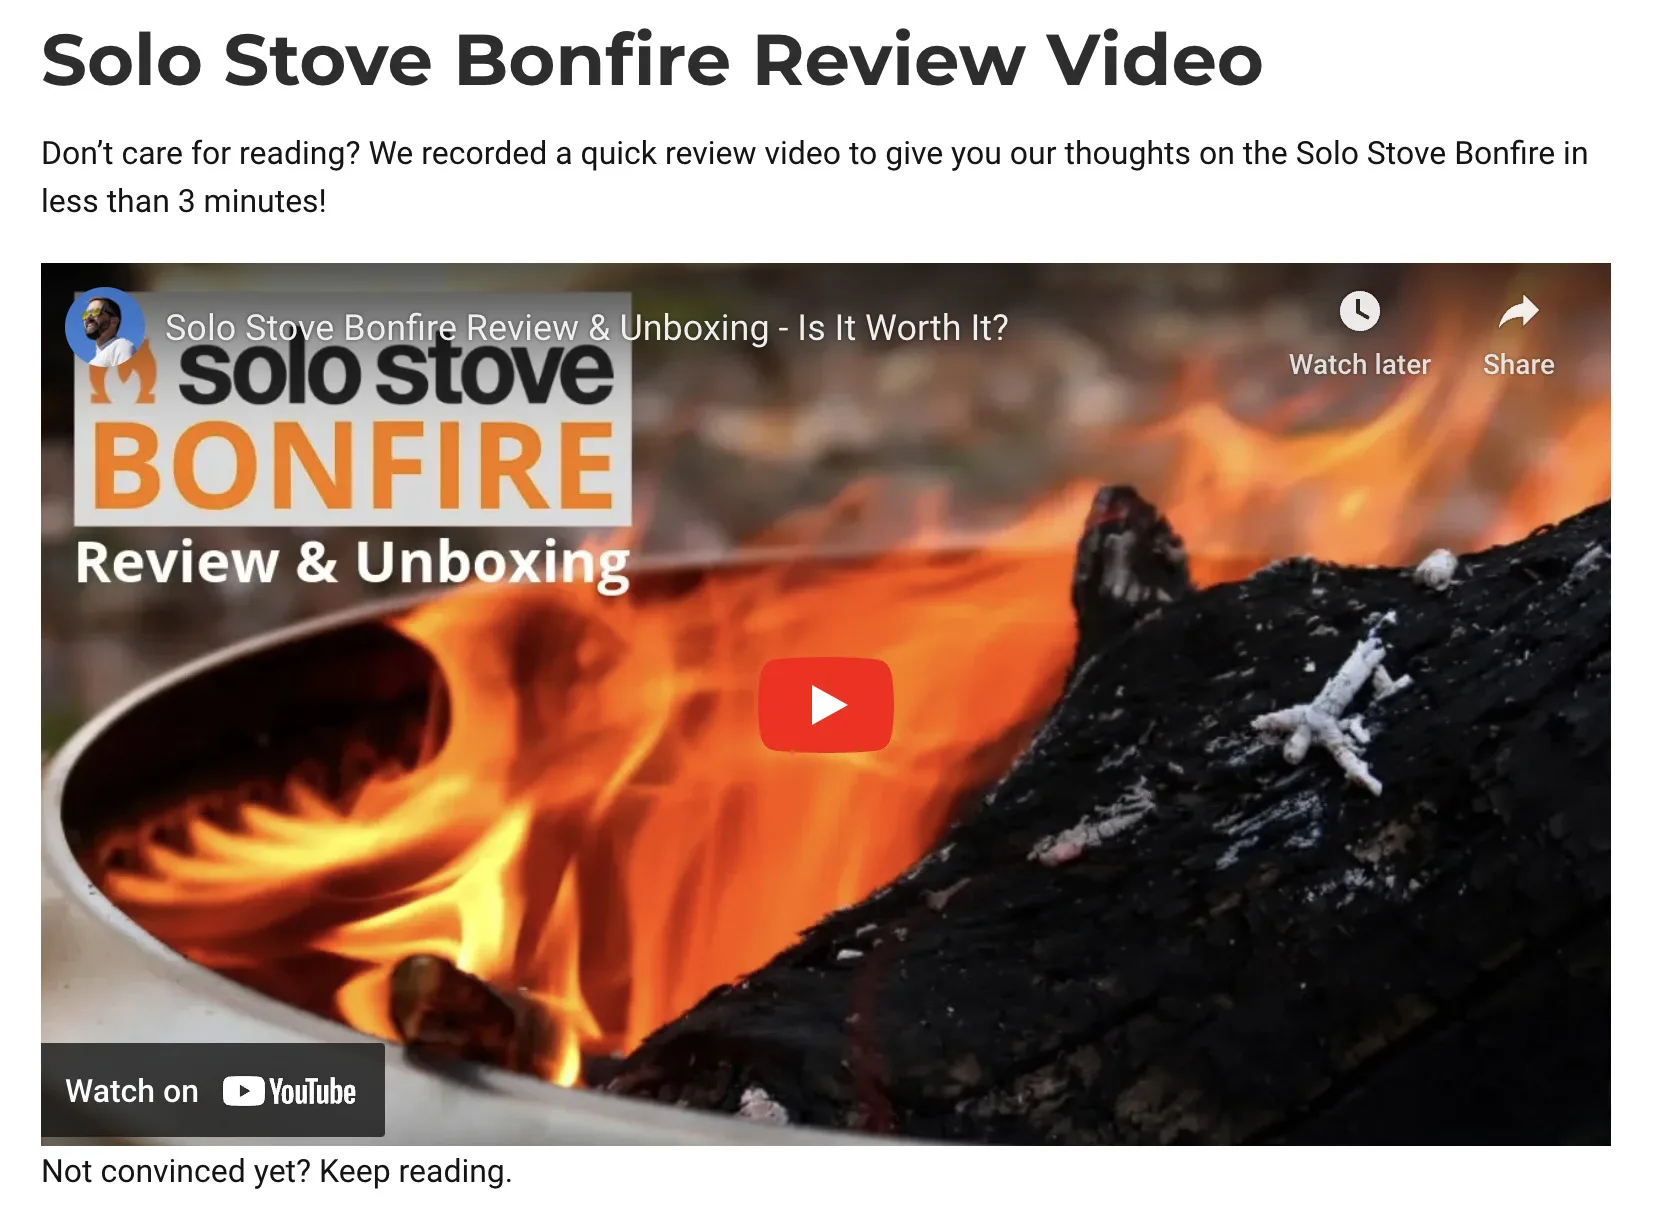 Solo Stove bonfire review affiliate marketing example